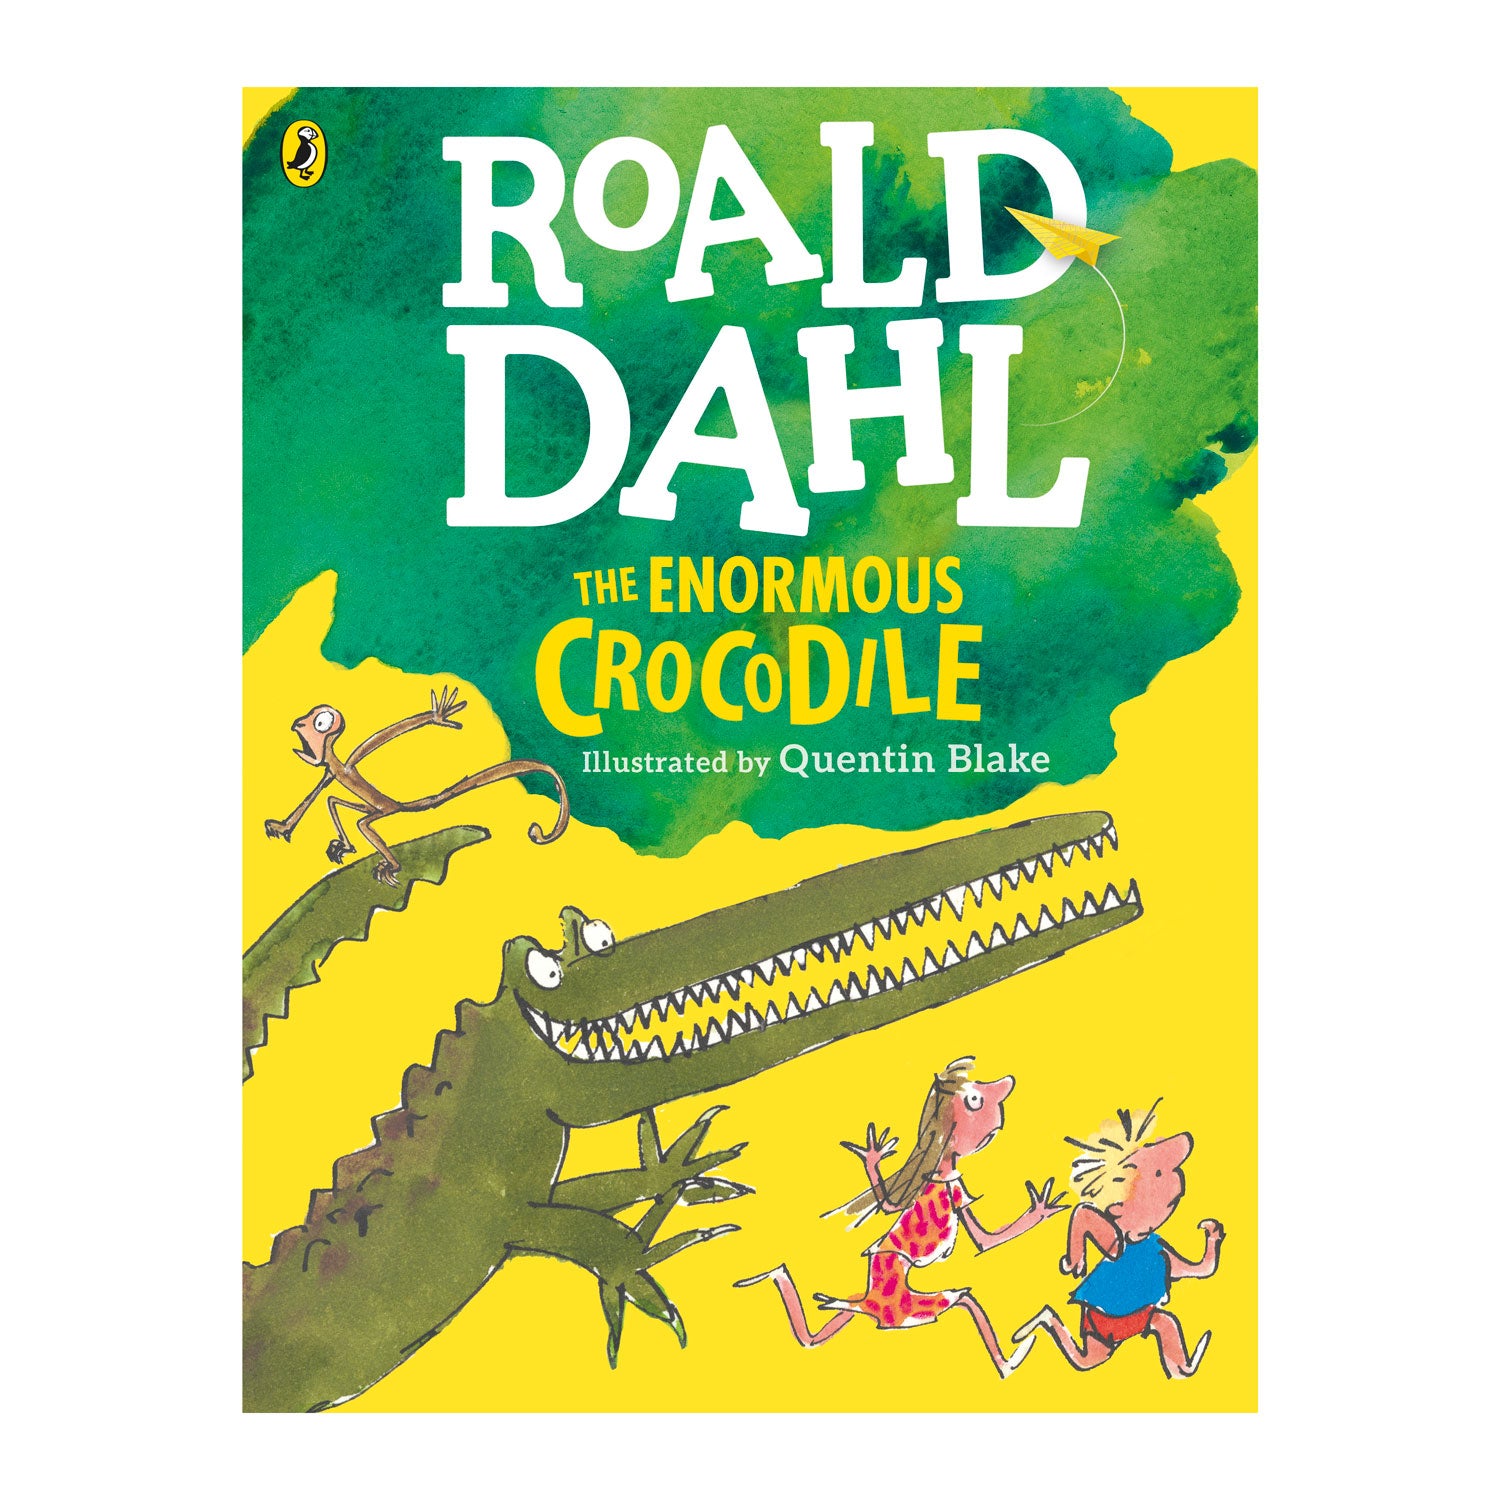 The Enormous Crocodile by Roald Dahl with illustrations by Quentin Blake